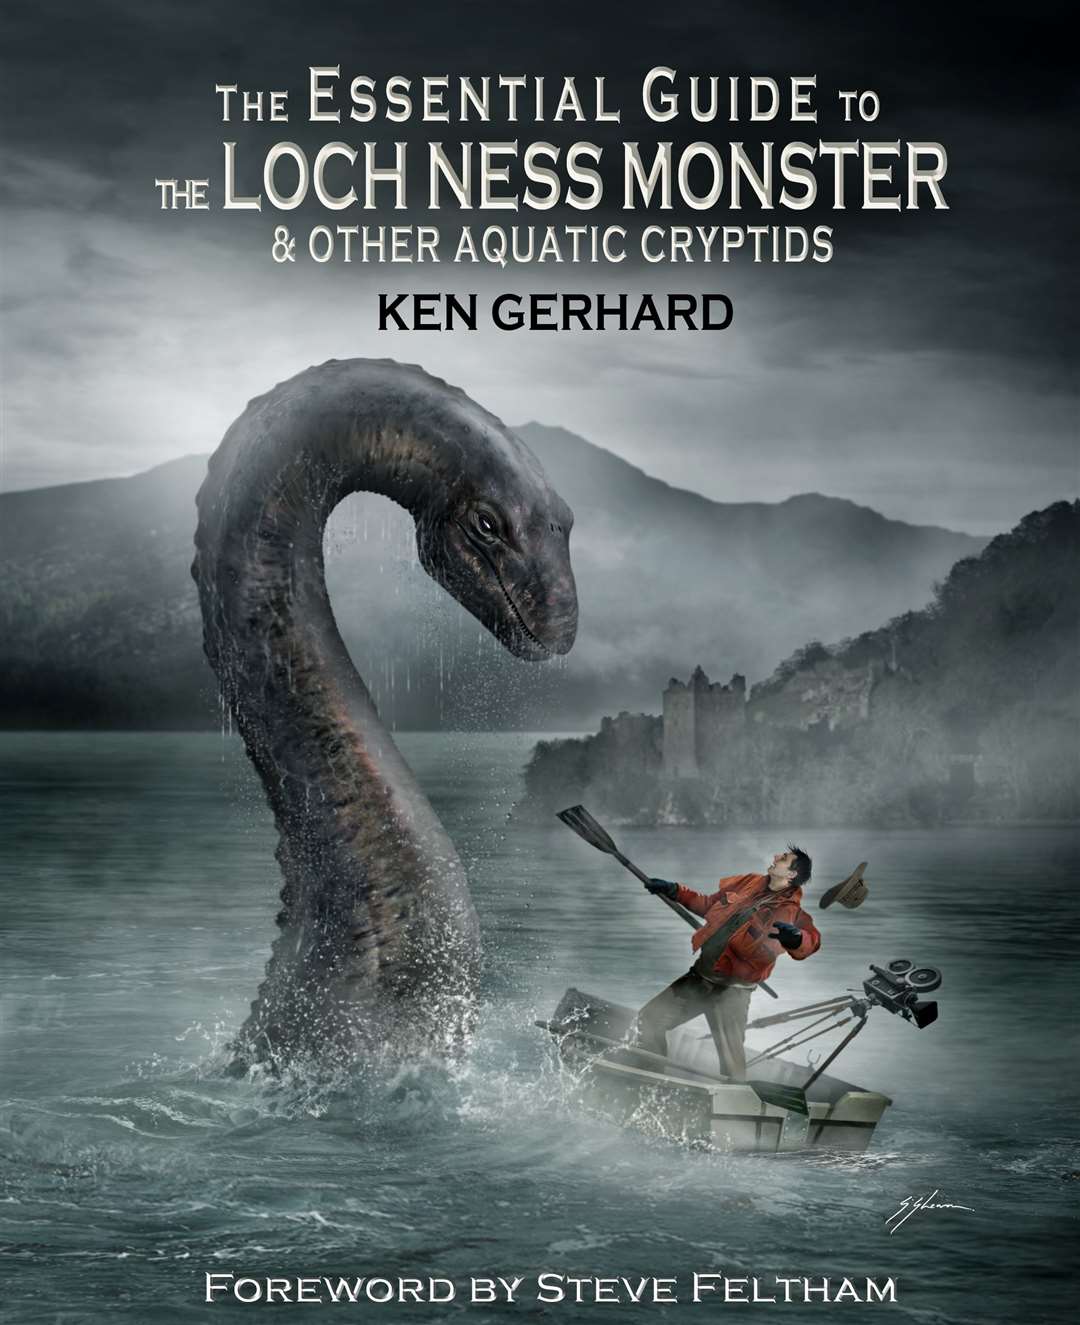 Cryptozoologist Ken Gerhard has written a book about Nessie.